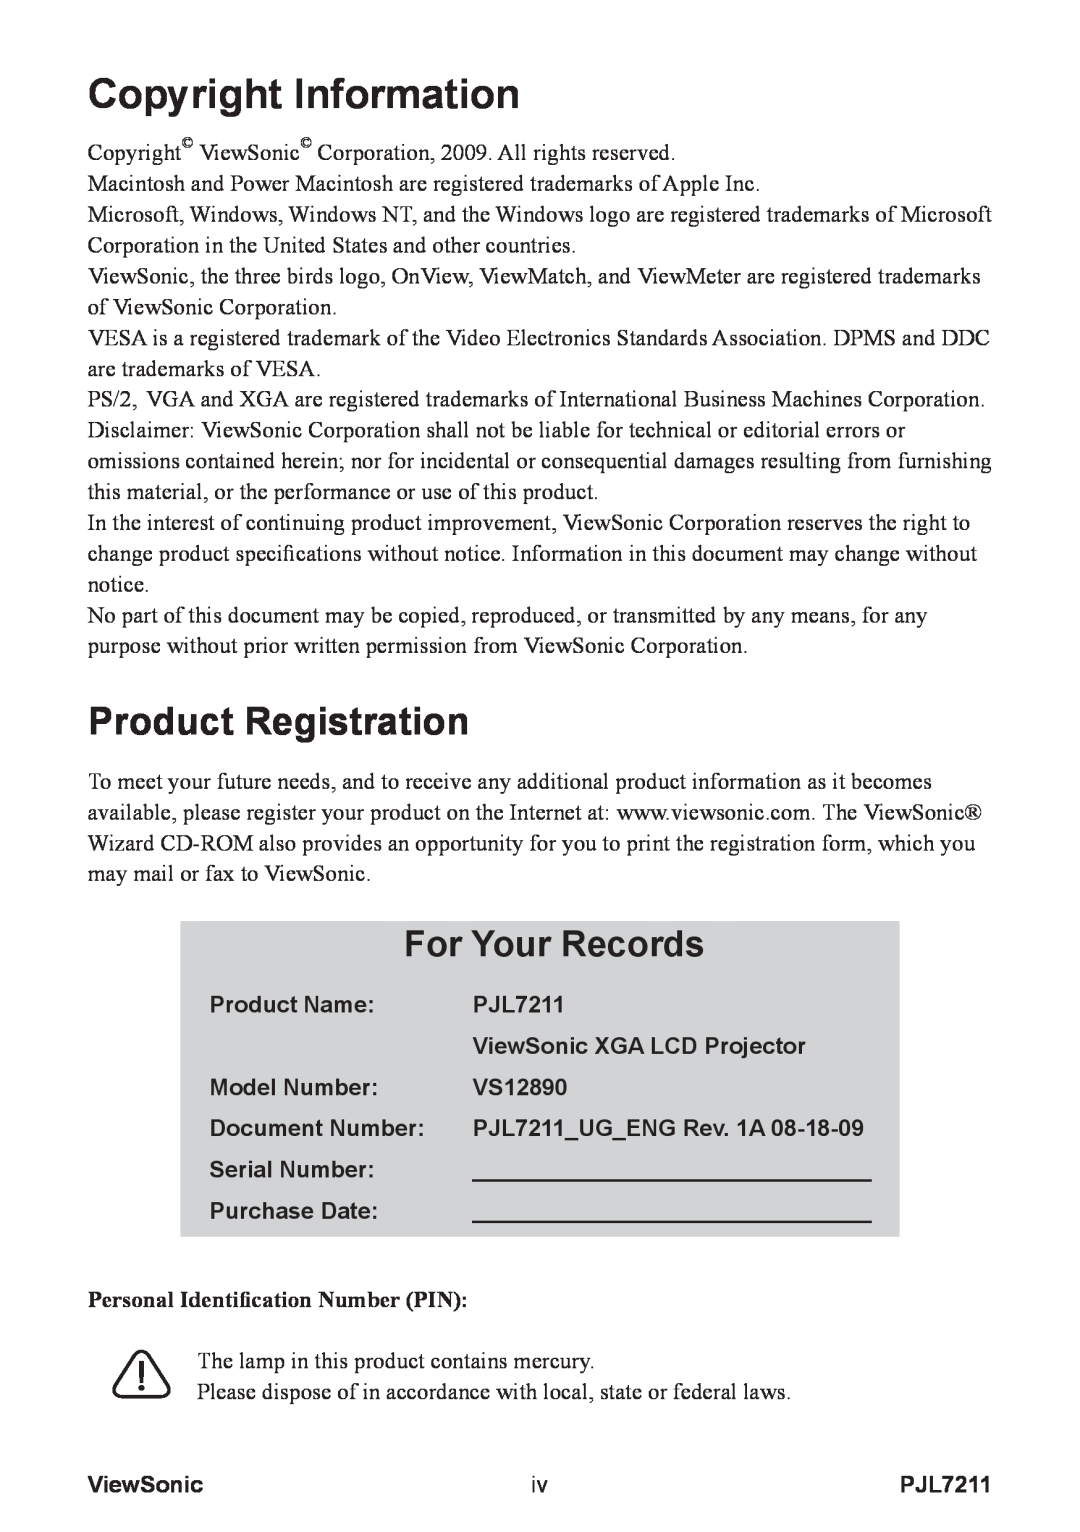 ViewSonic PJL7211 Product Registration, For Your Records, Copyright Information, Product Name, ViewSonic XGA LCD Projector 